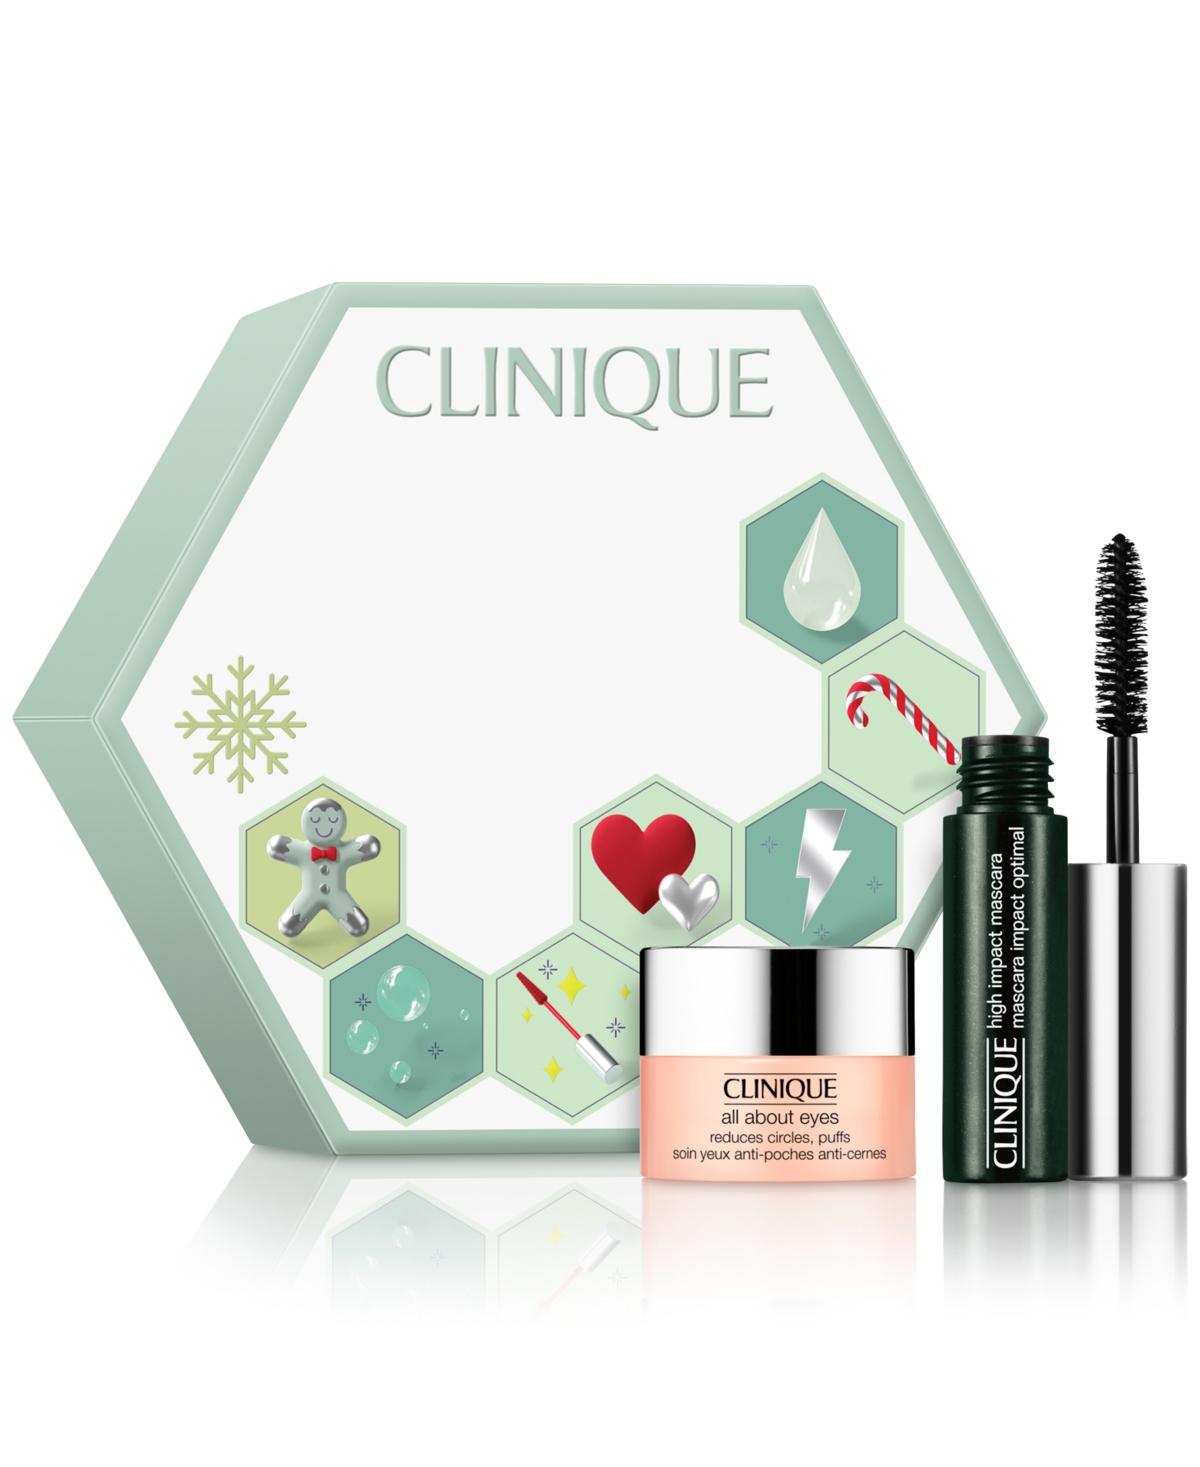 2-Pc Clinique Easy Eye Set w/ Mascara & Eye Cream Gel $6.50 + Free Store Pickup at Macy's or Free Shipping on Orders $25+